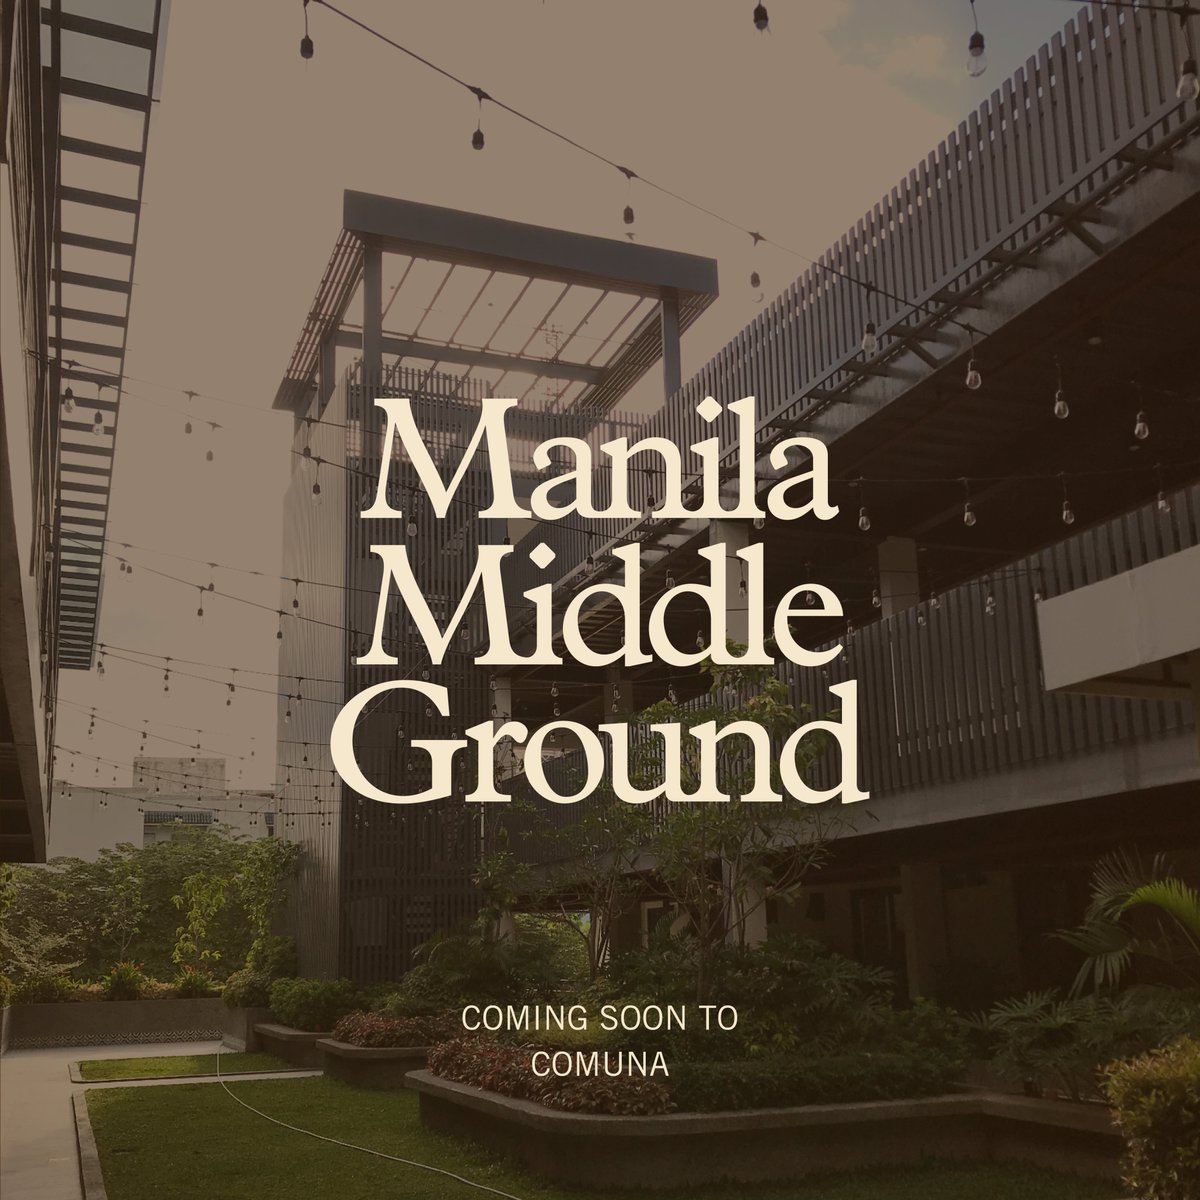 Manila Middle Ground is a creative retail and events space focusing on art and design merchandise—ranging from art prints, stickers, zines, charms and decors, wearables, and specialty craft items, among others—from local artists, crafters, and brands.